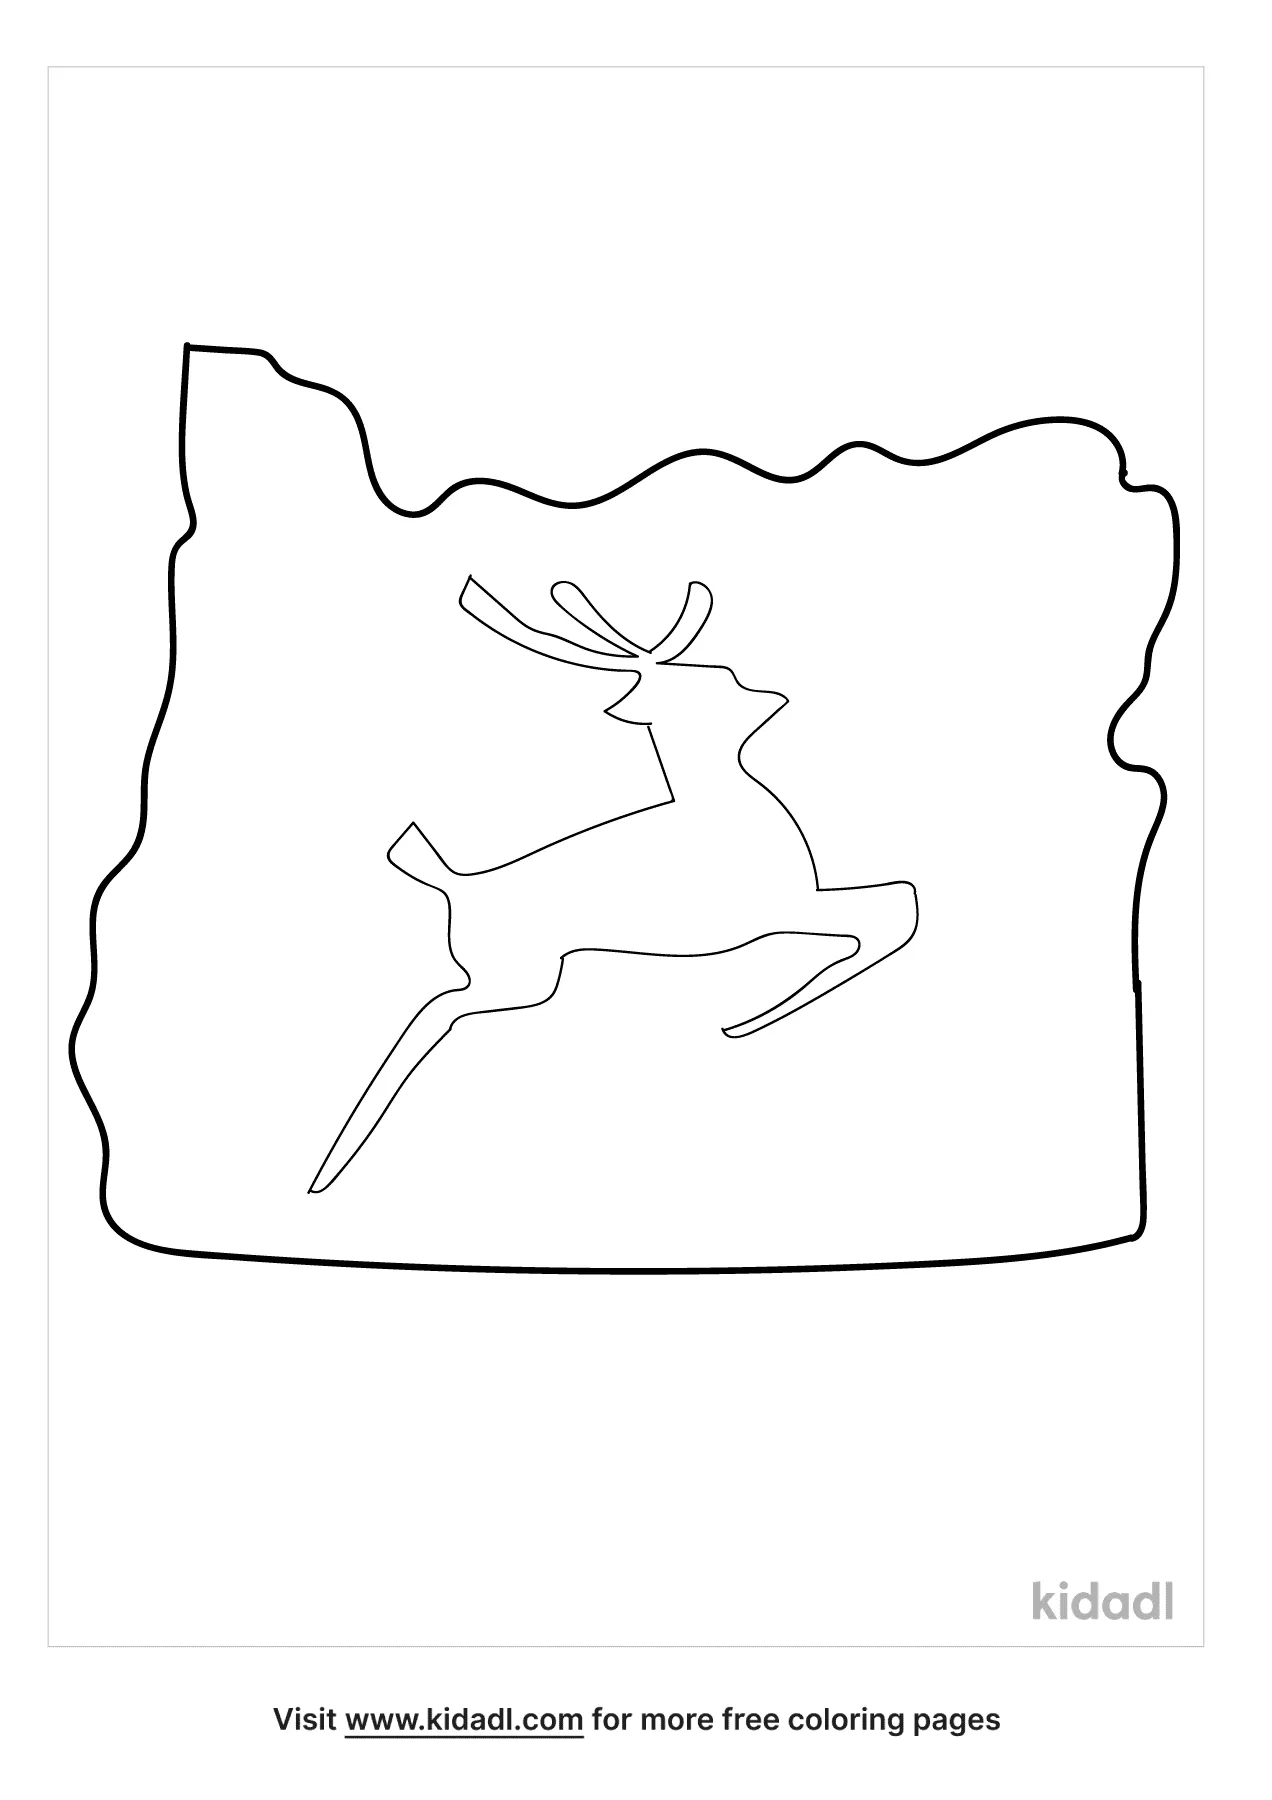 Oregon Icons Coloring Page